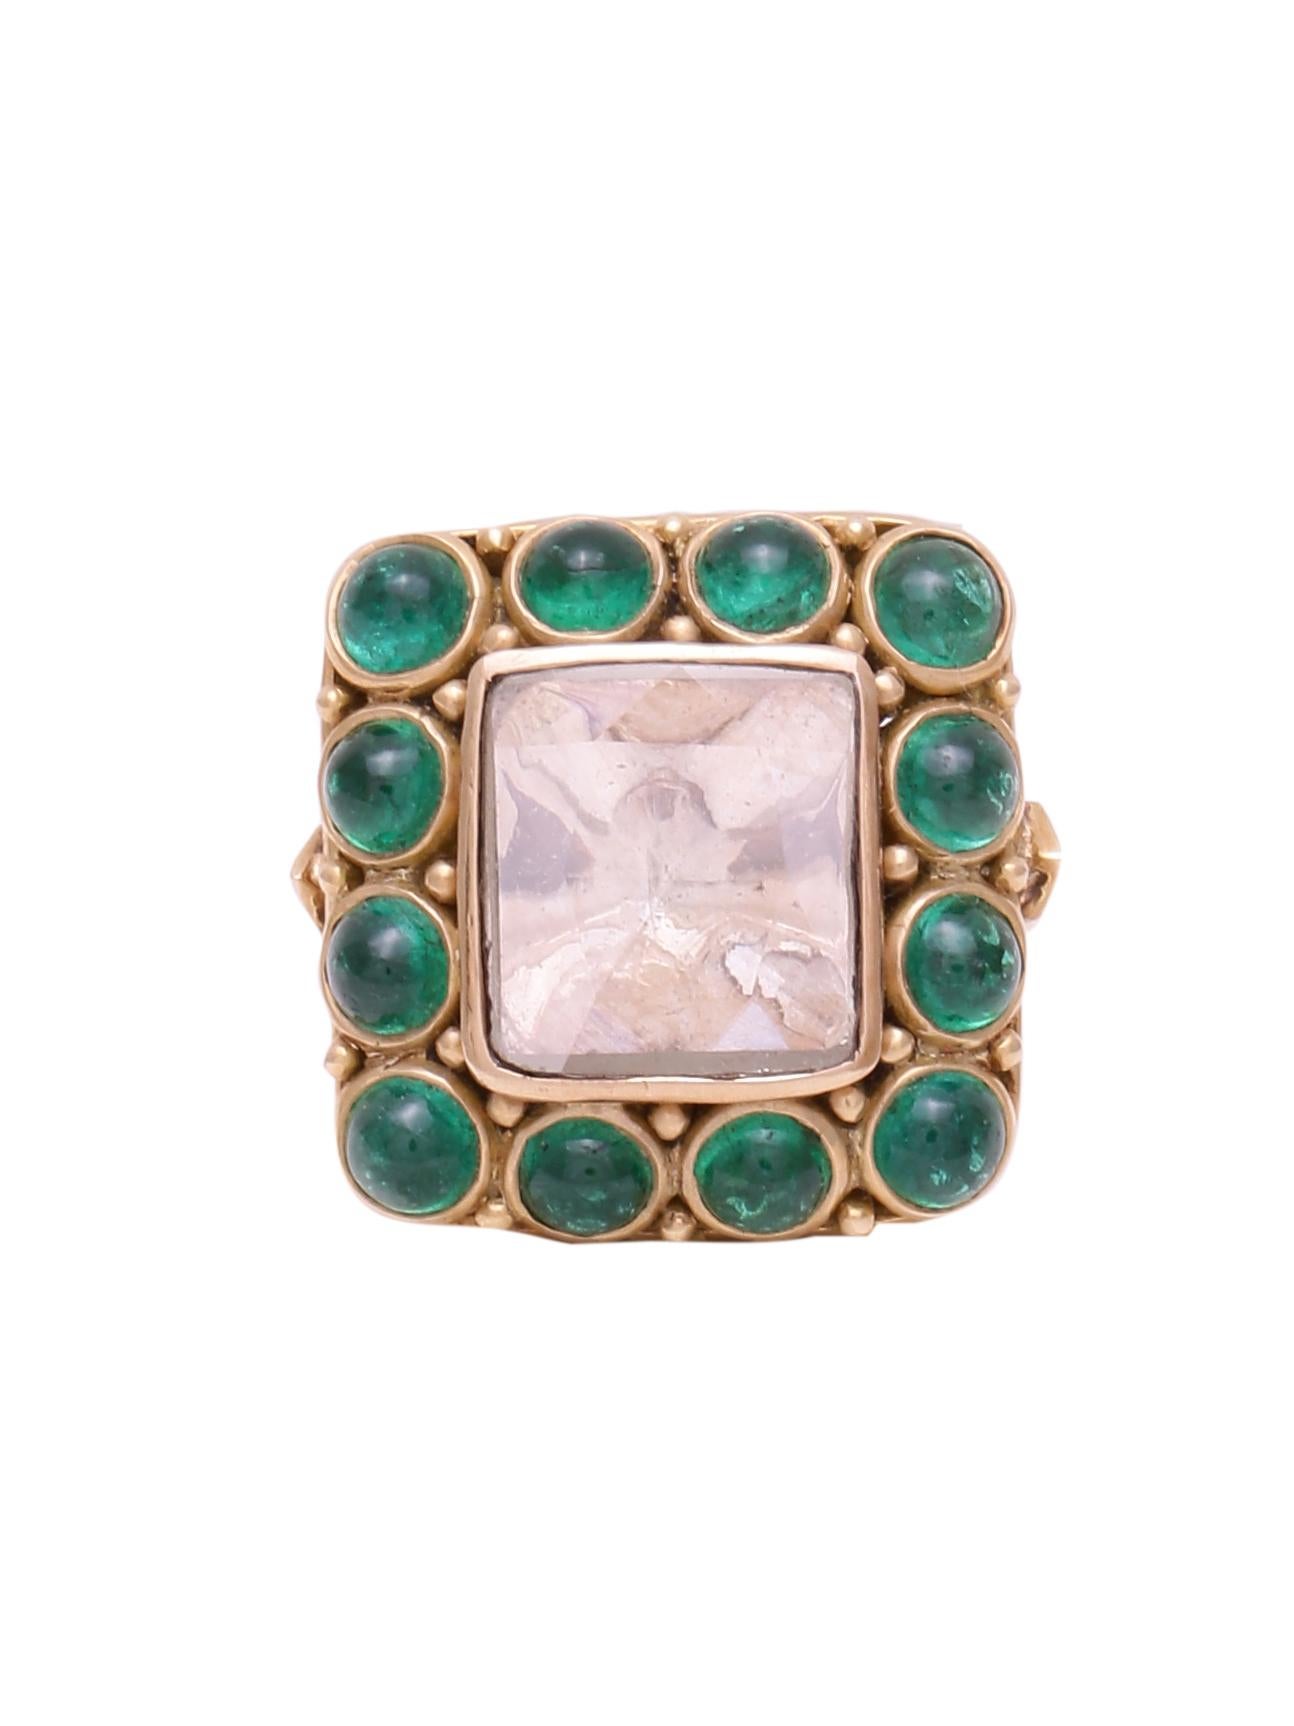 A ring with a large beautiful cushion shape diamond rose cut weighing 2.24 carats with good clarity surrounded by Emerald Round Cabochons. The whole ring is handcrafted in 18K Yellow gold. You will notice really intricate work on the back of the